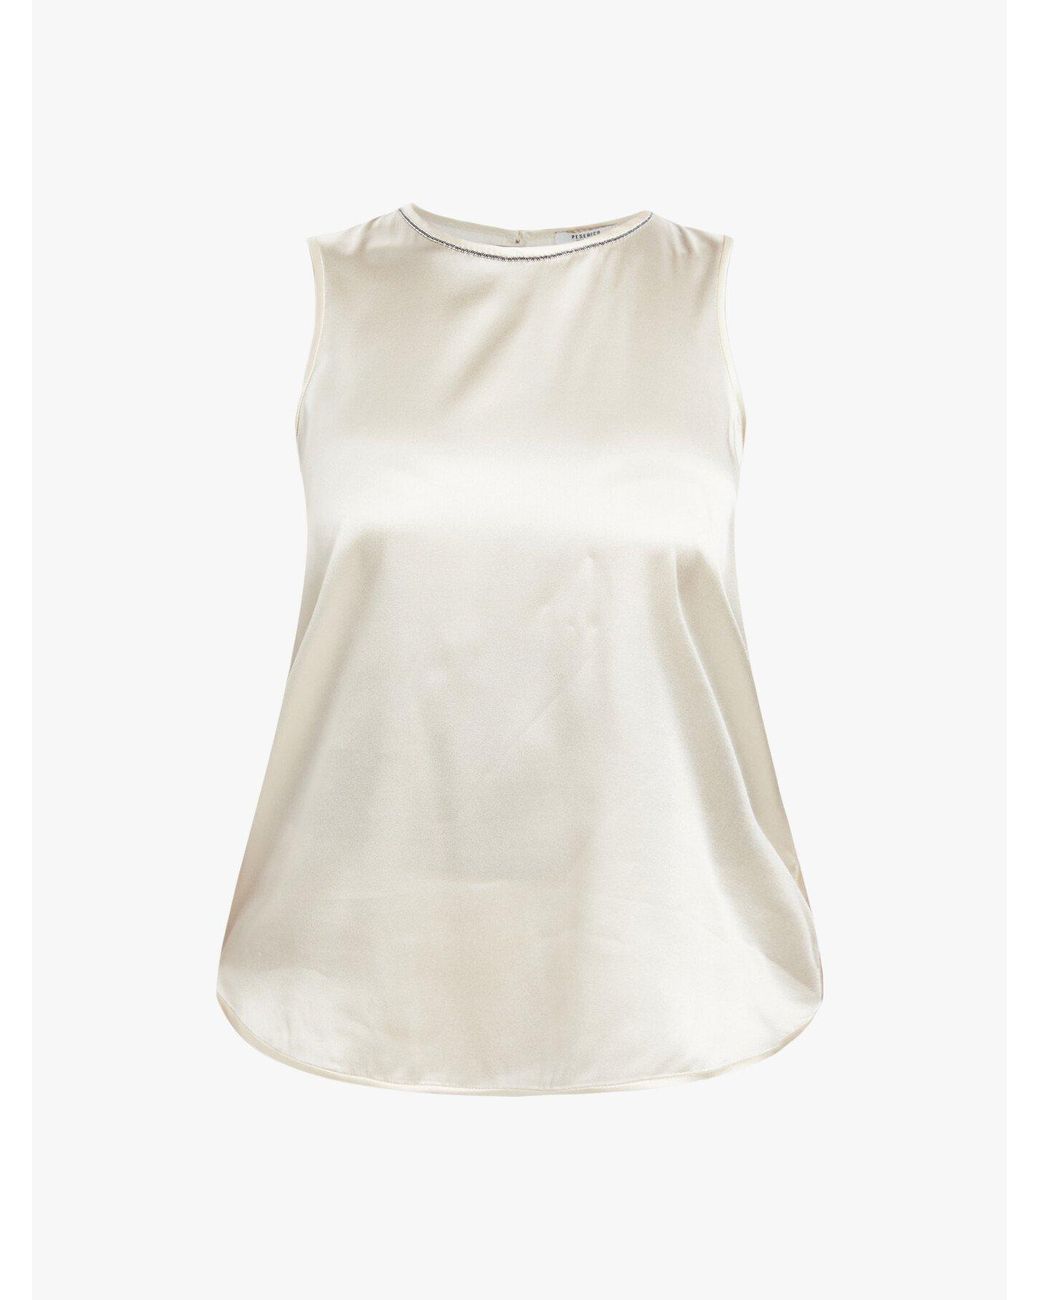 Peserico Shell Top in White | Lyst UK